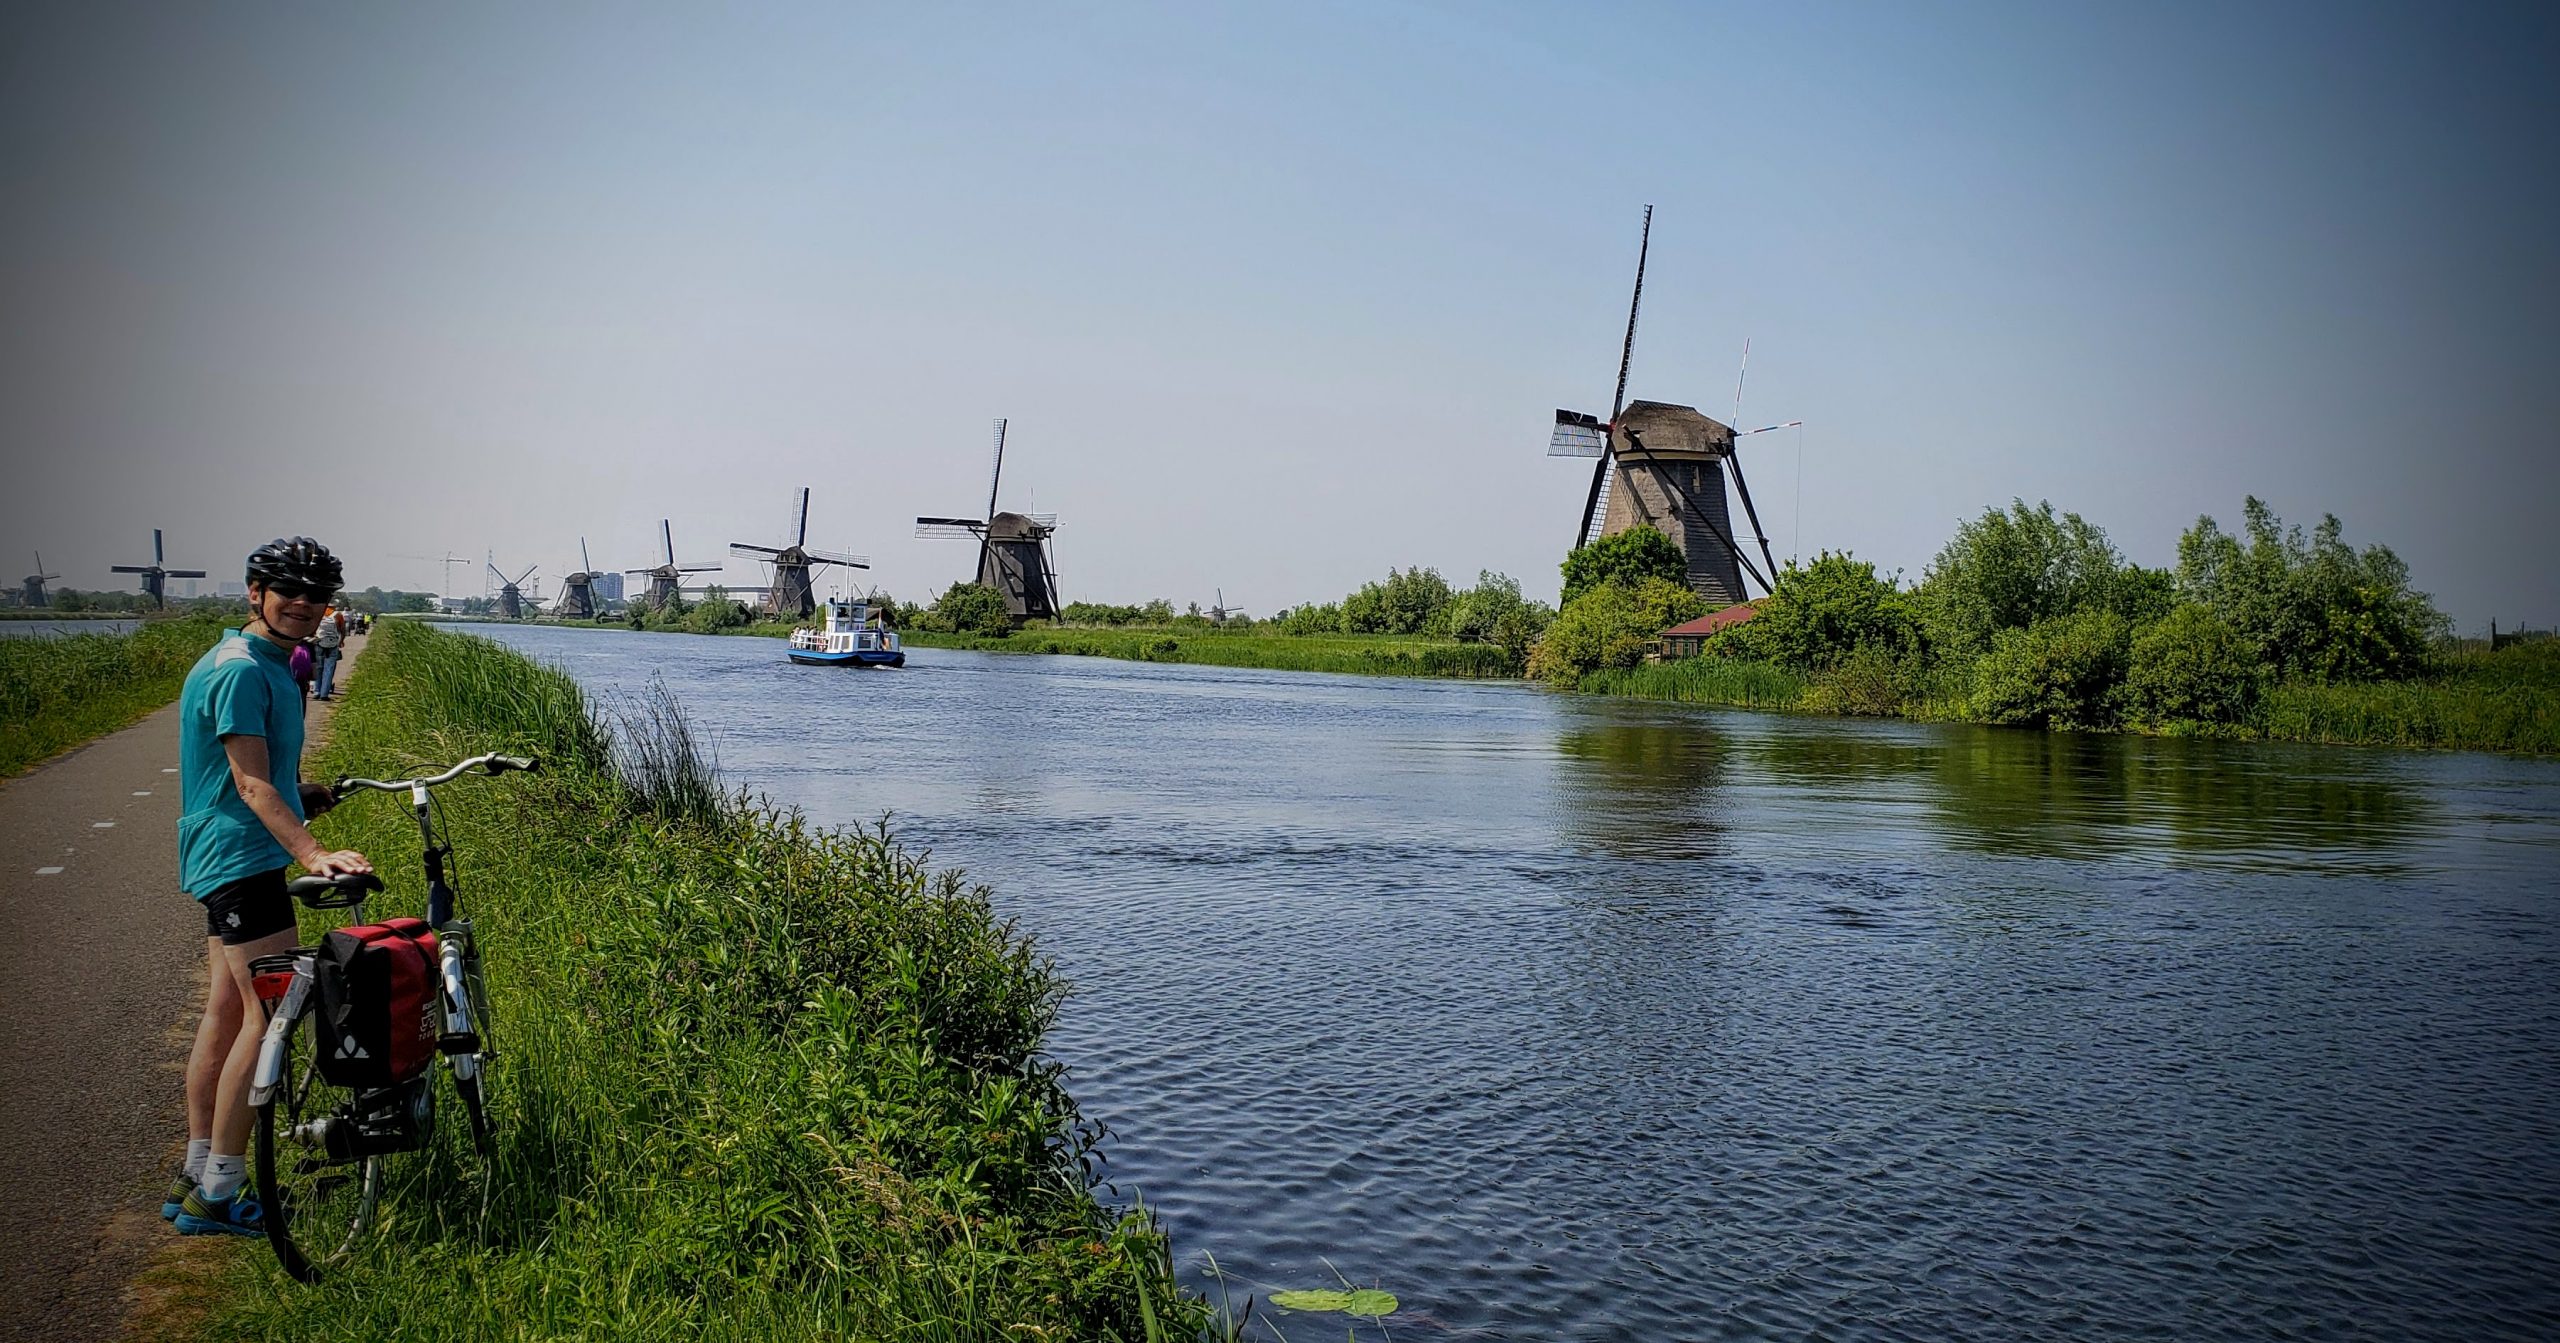 Bike and Barge – Amsterdam to Bruges